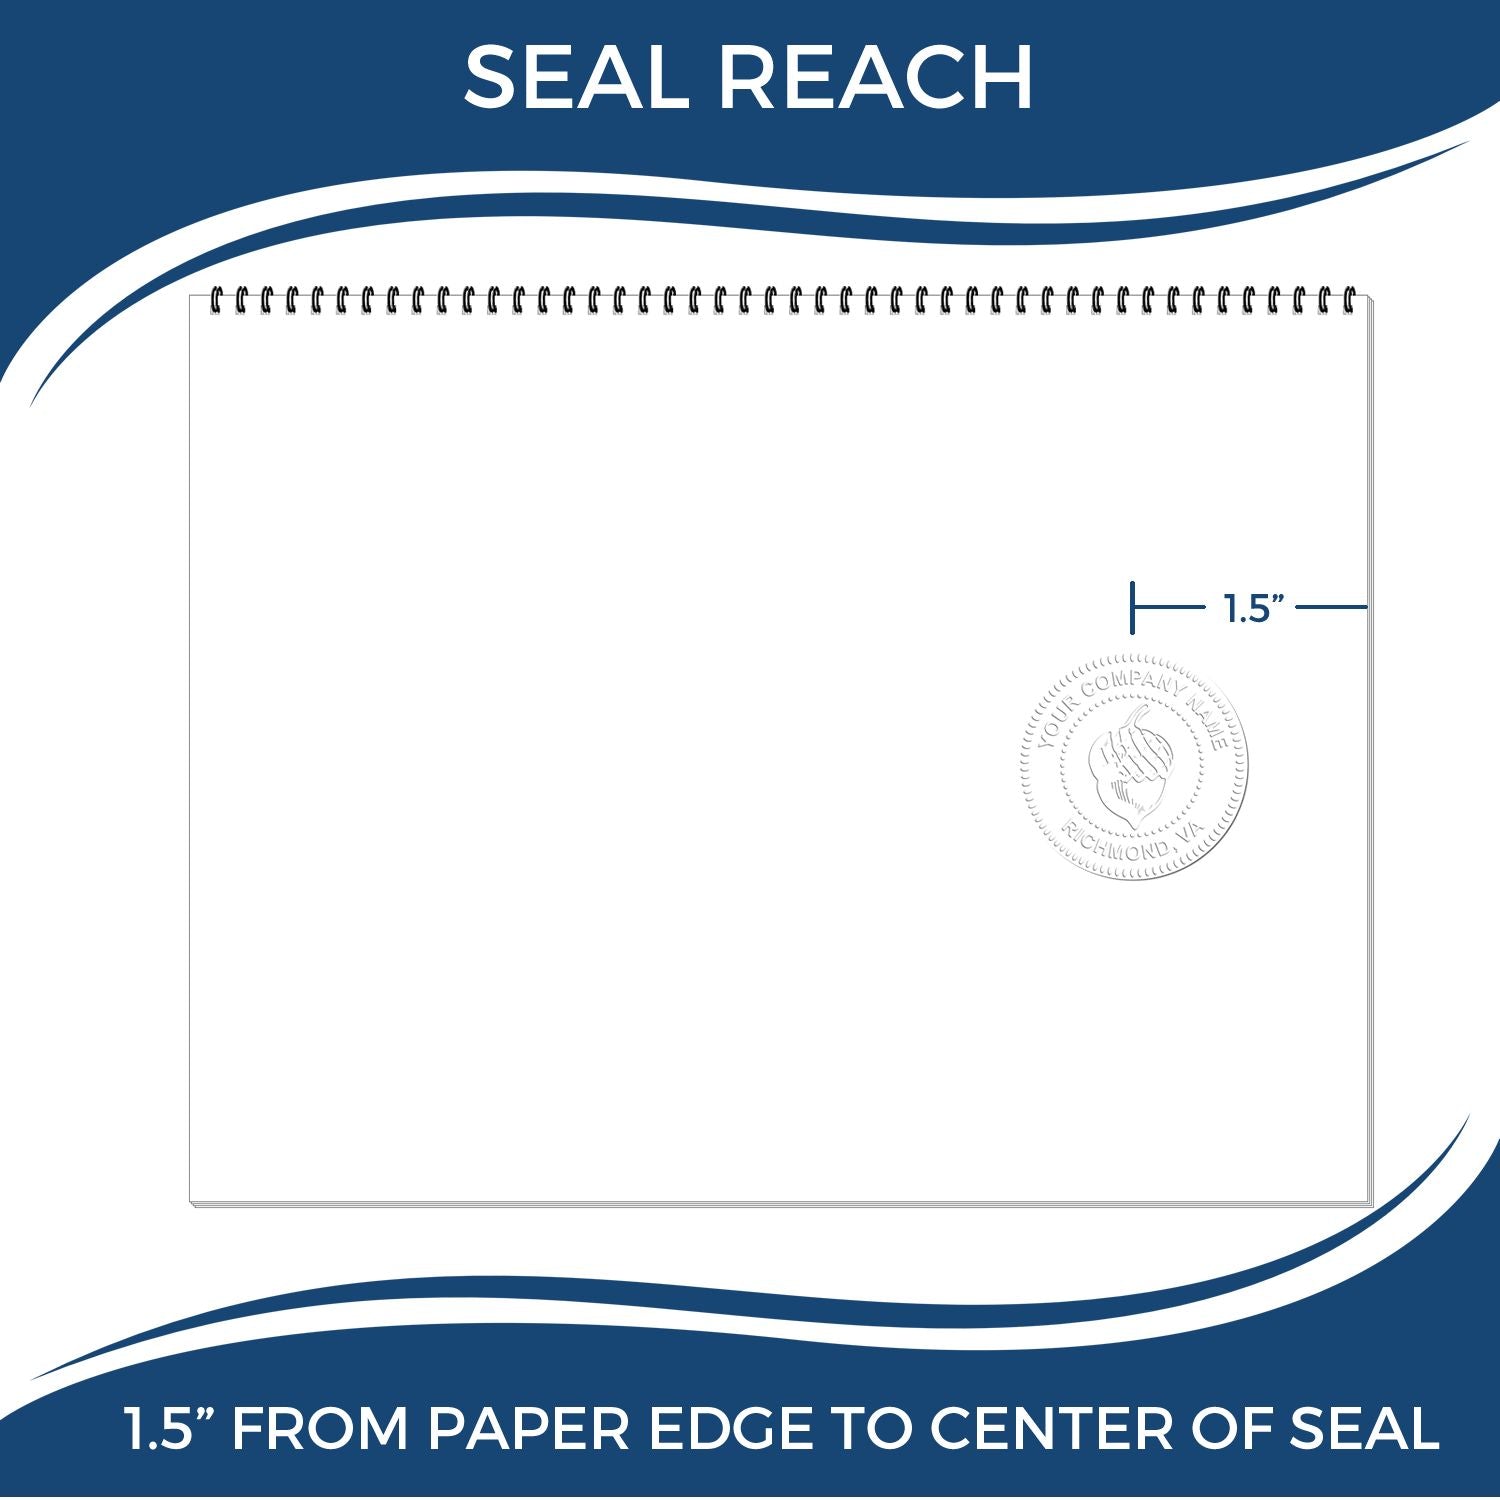 An infographic showing the seal reach which is represented by a ruler and a miniature seal image of the Gift Colorado Engineer Seal